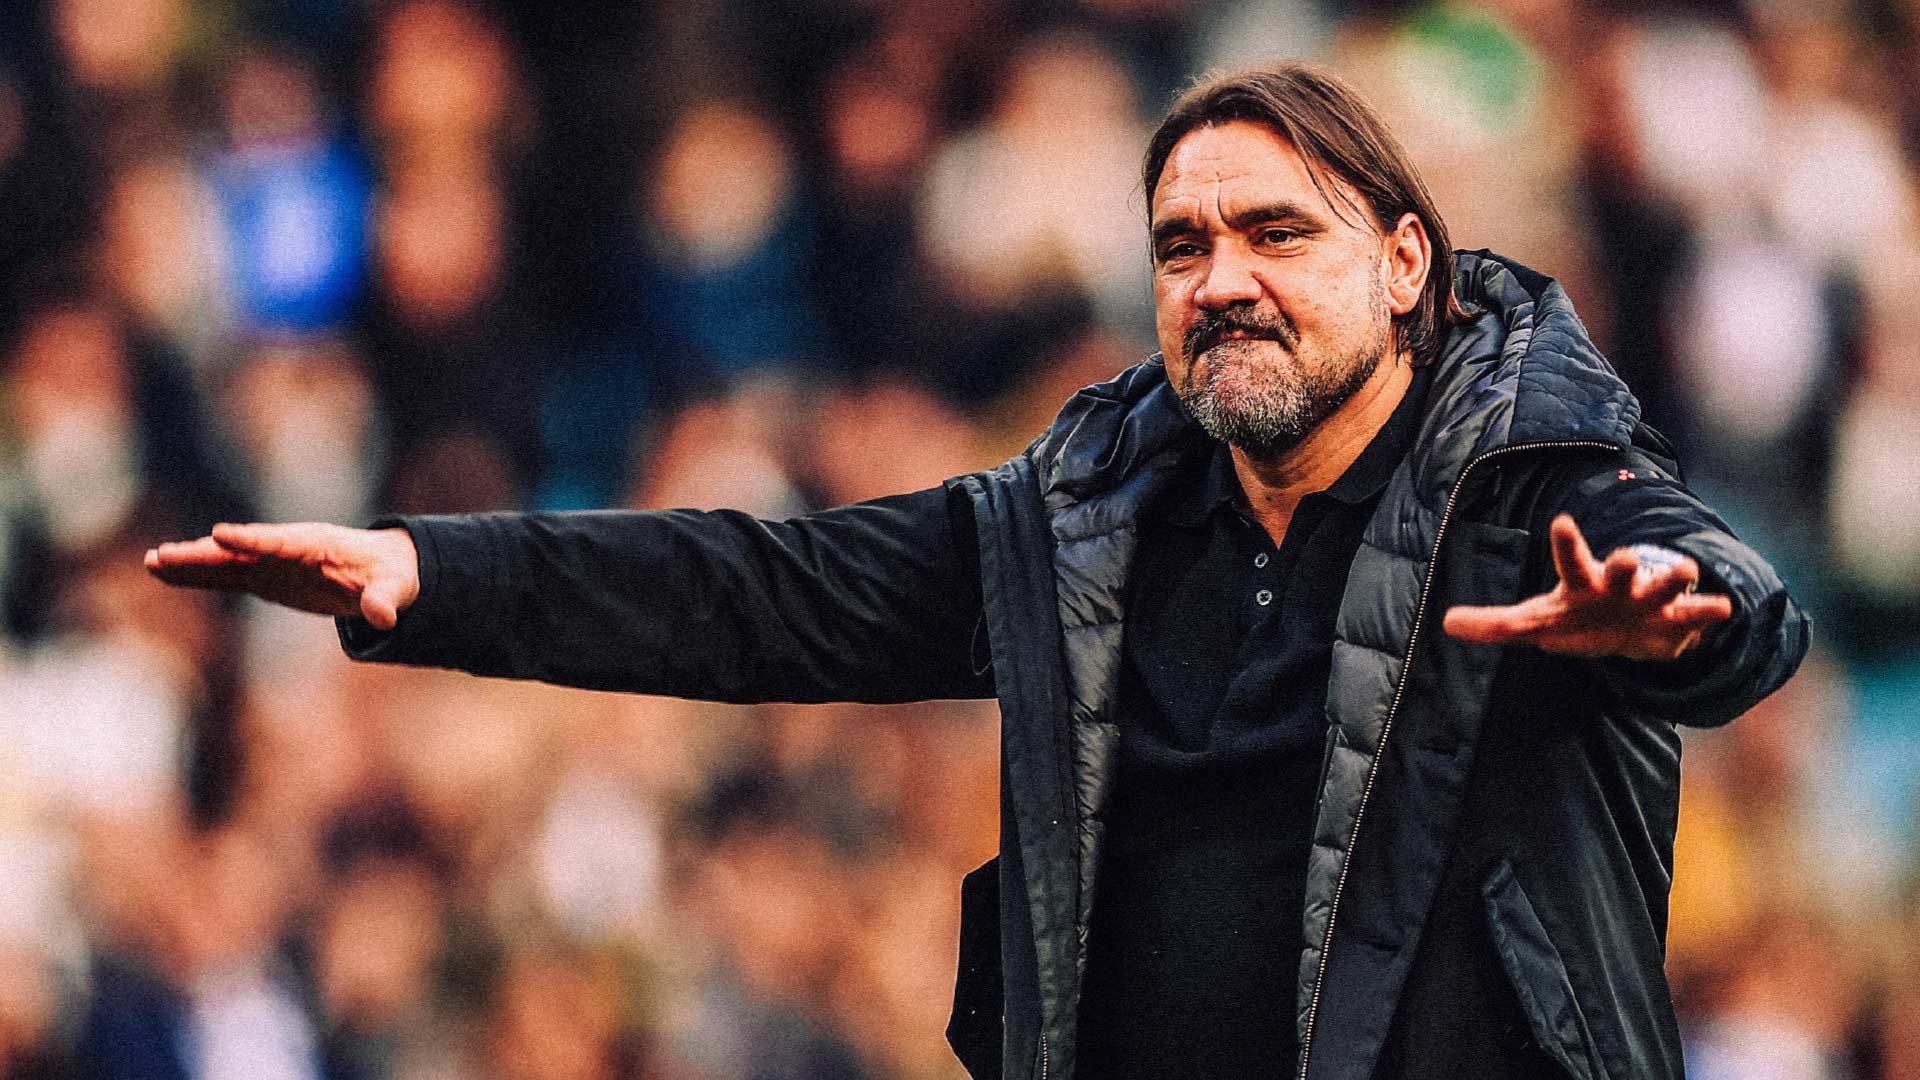 Daniel Farke saluting the crowd after yet another Leeds United win. He looks justifiably smug